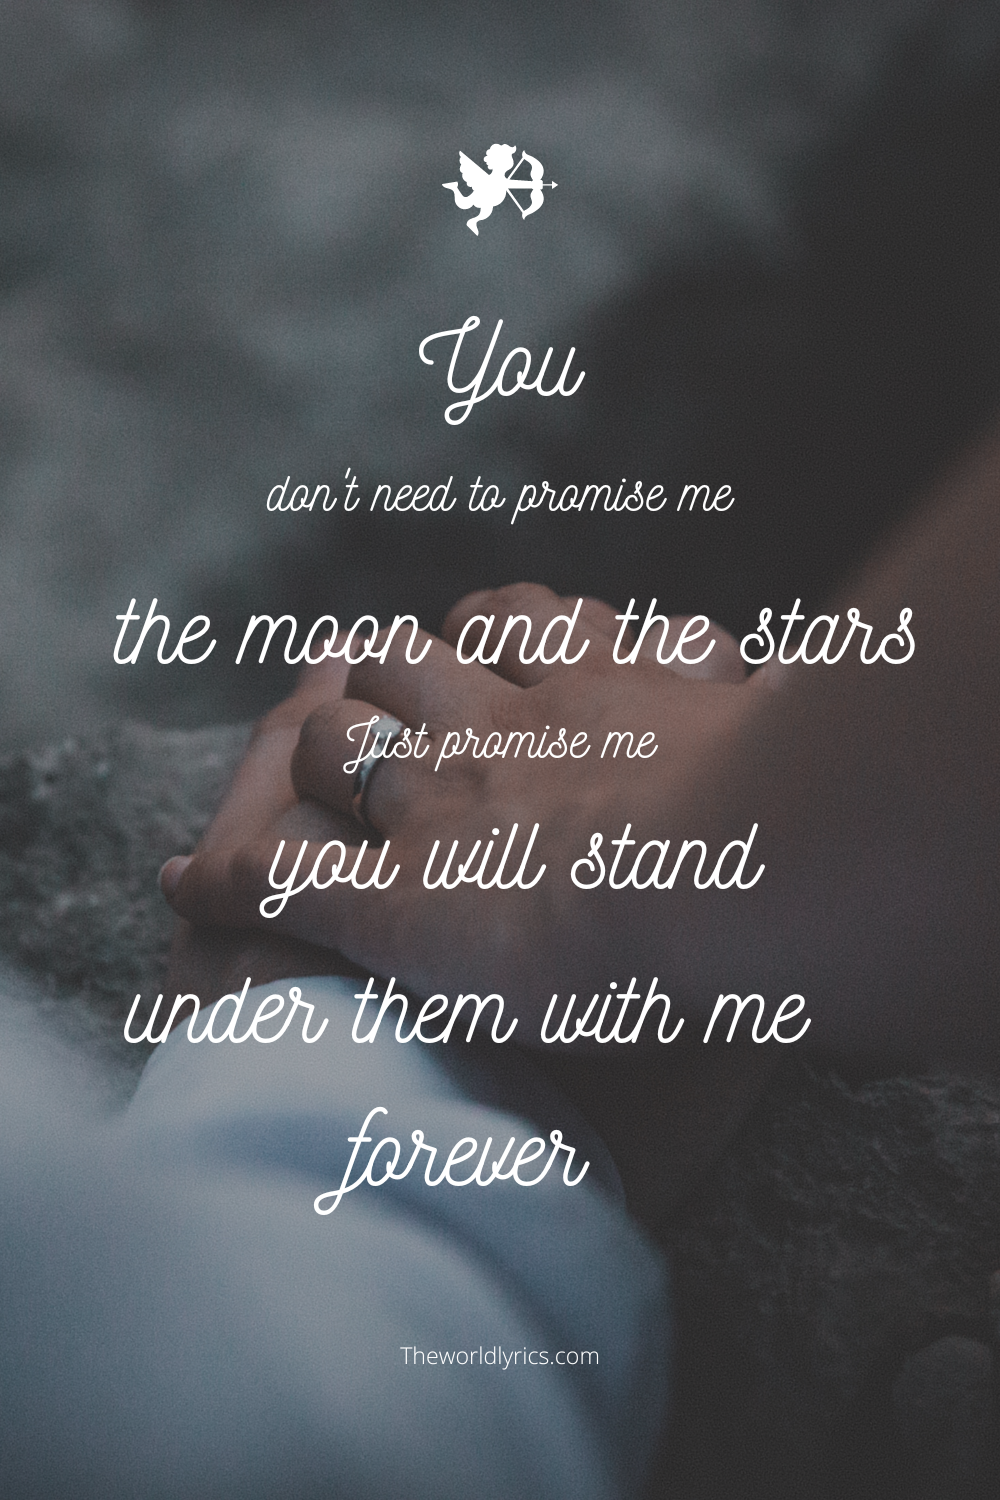 50+ True Love Quotes that will Touch Your Soul